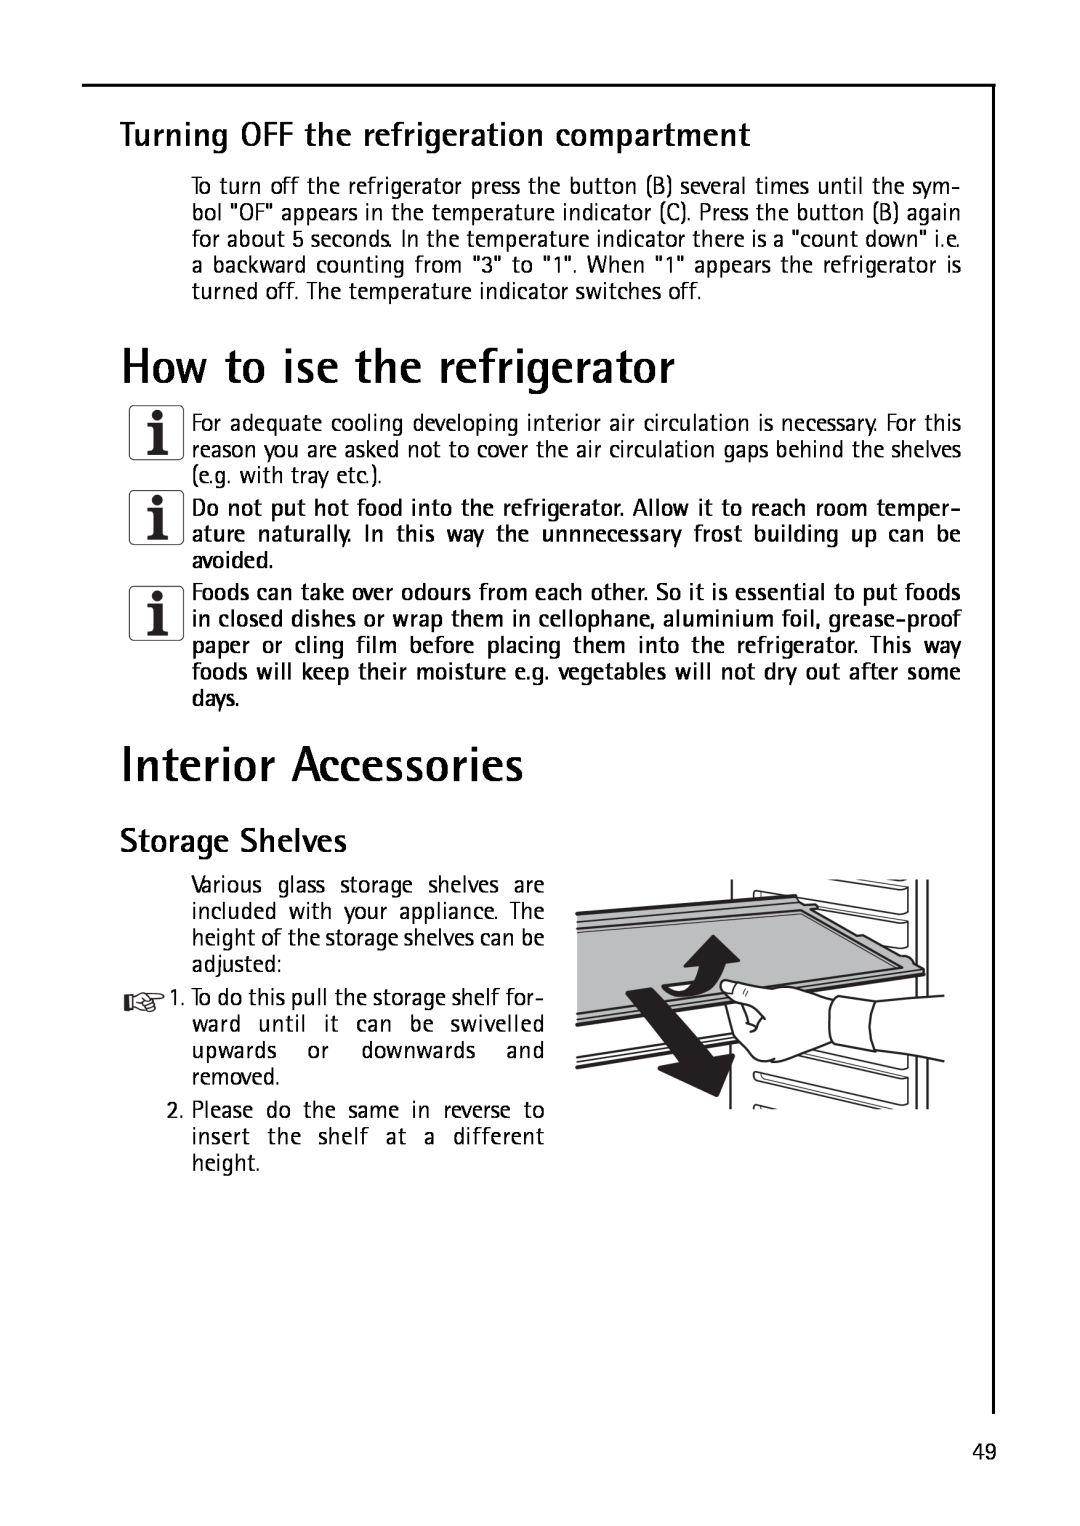 AEG S 75348 KG, S75348 KG8 How to ise the refrigerator, Interior Accessories, Turning OFF the refrigeration compartment 